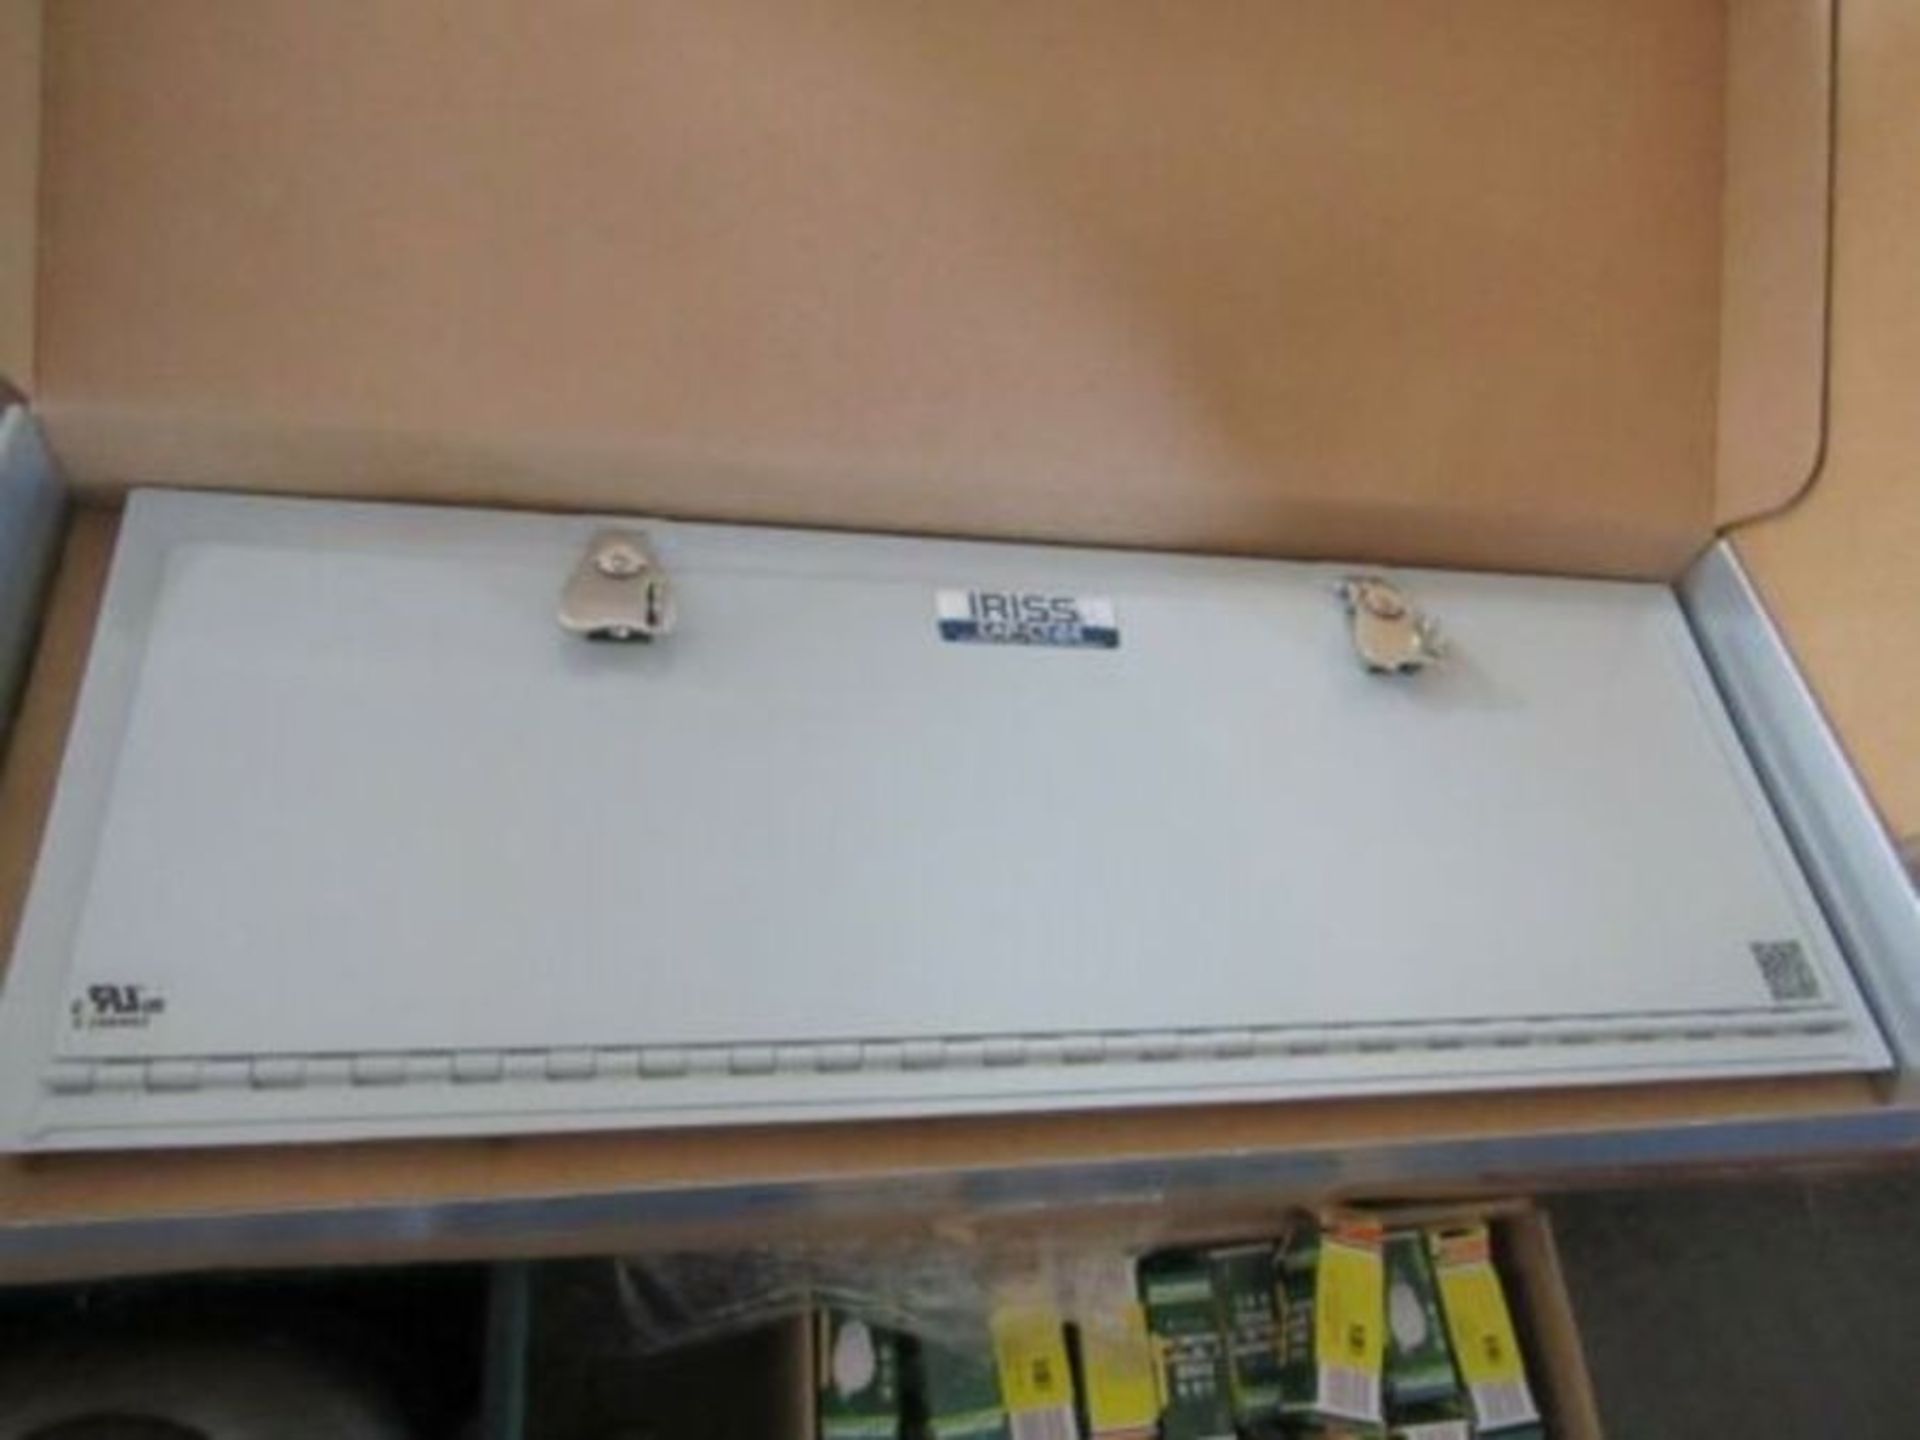 Shelf of IRISS Infrared Inspection Covers - 6 lines ebay value of £2k - IRISS - Image 3 of 3